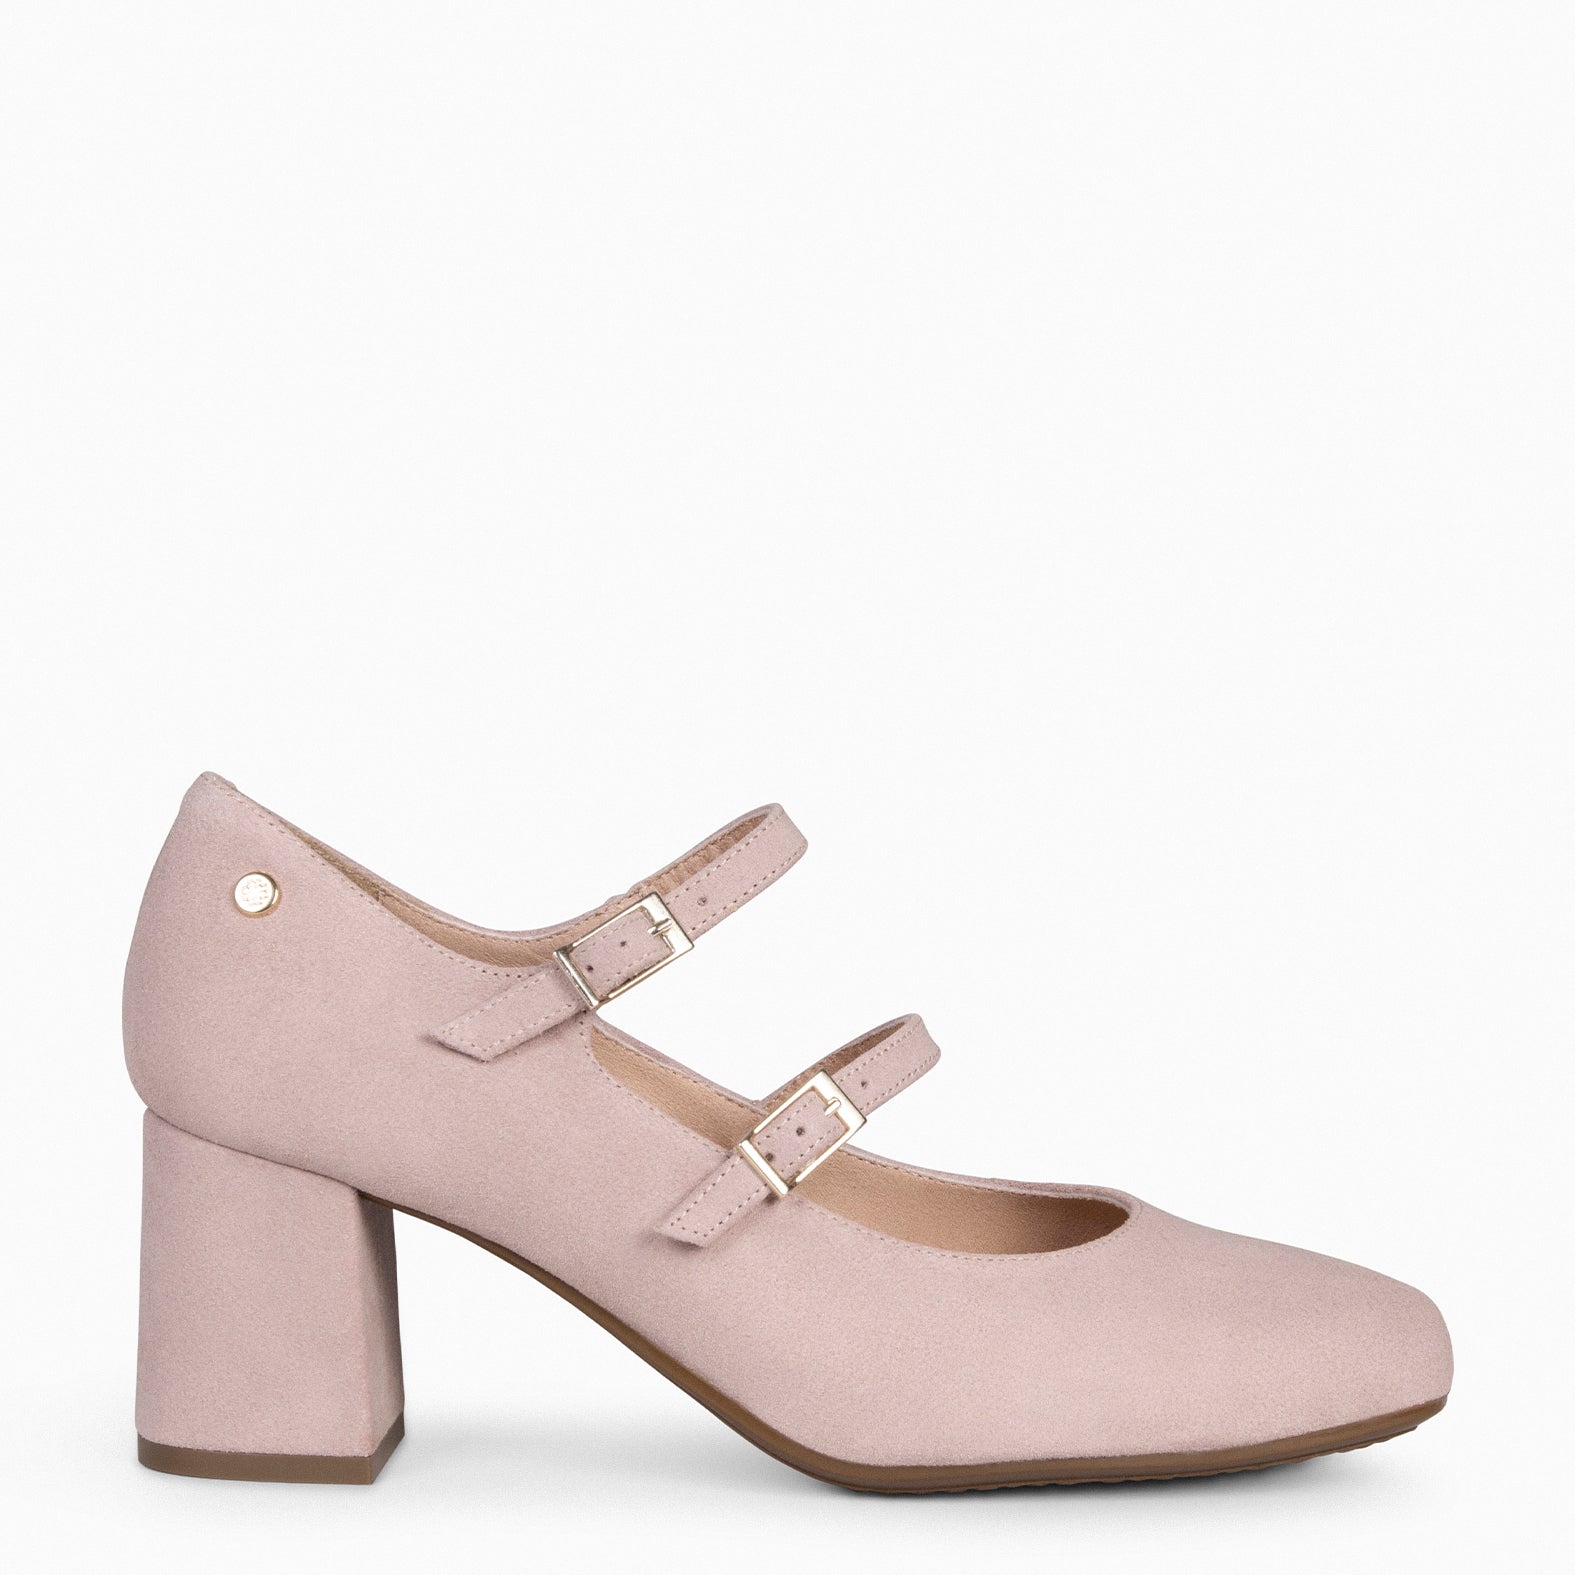 FEBRIS – PINK leather heel with straps